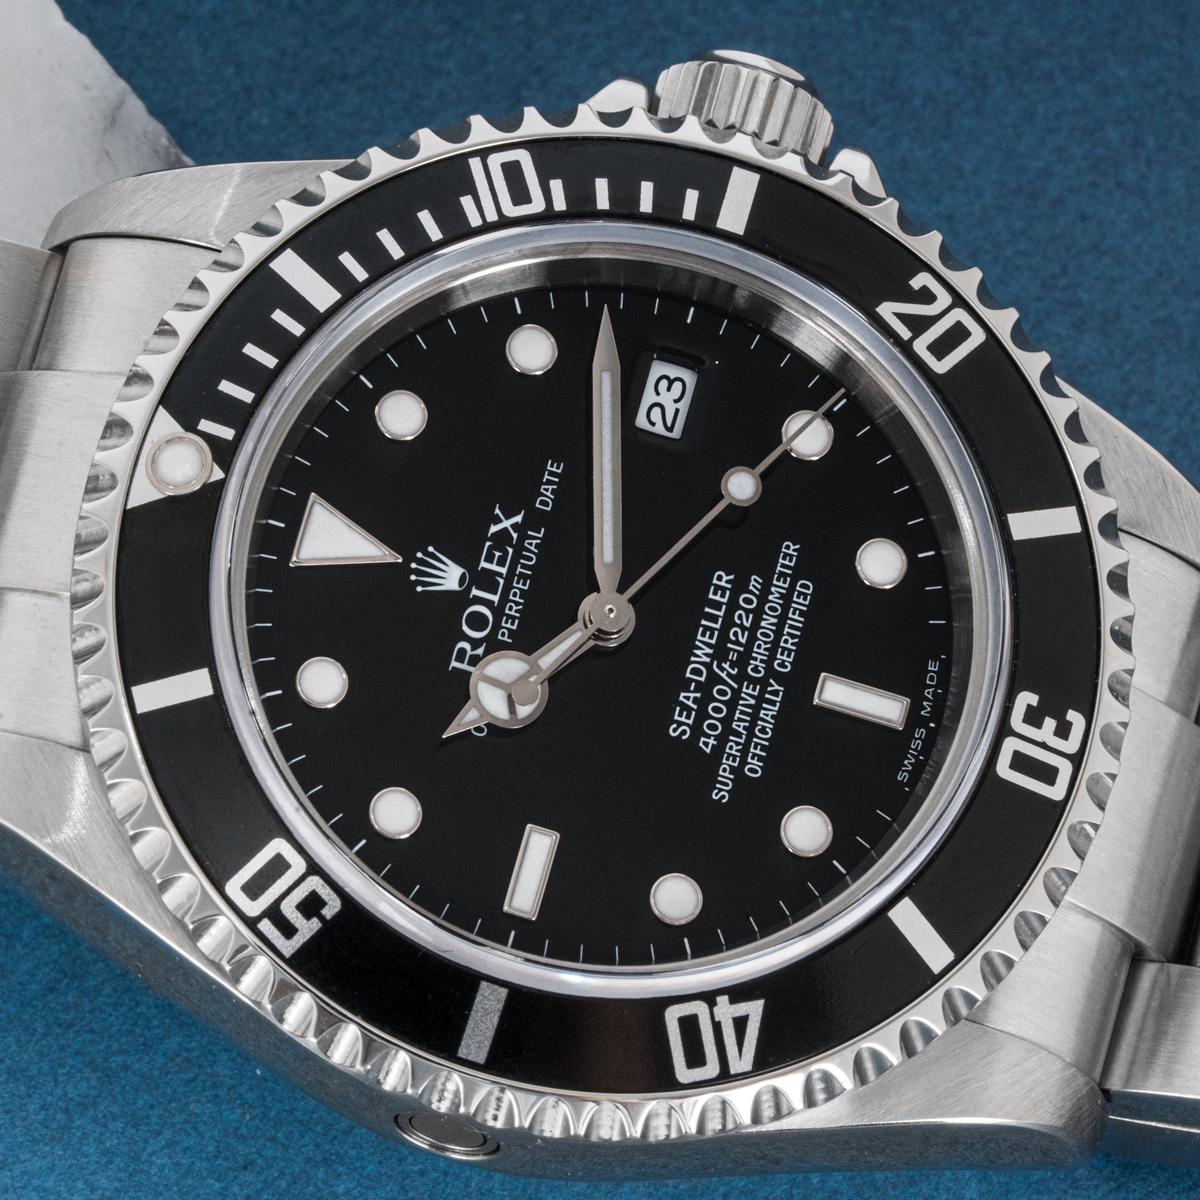 An Oystersteel 40mm Sea-Dweller by Rolex. Featuring a black dial with the date display at 3 o'clock and a black unidirectional rotatable bezel with 60 minute graduations.

The Oyster bracelet is equipped with a folding Oysterlock clasp. Fitted with